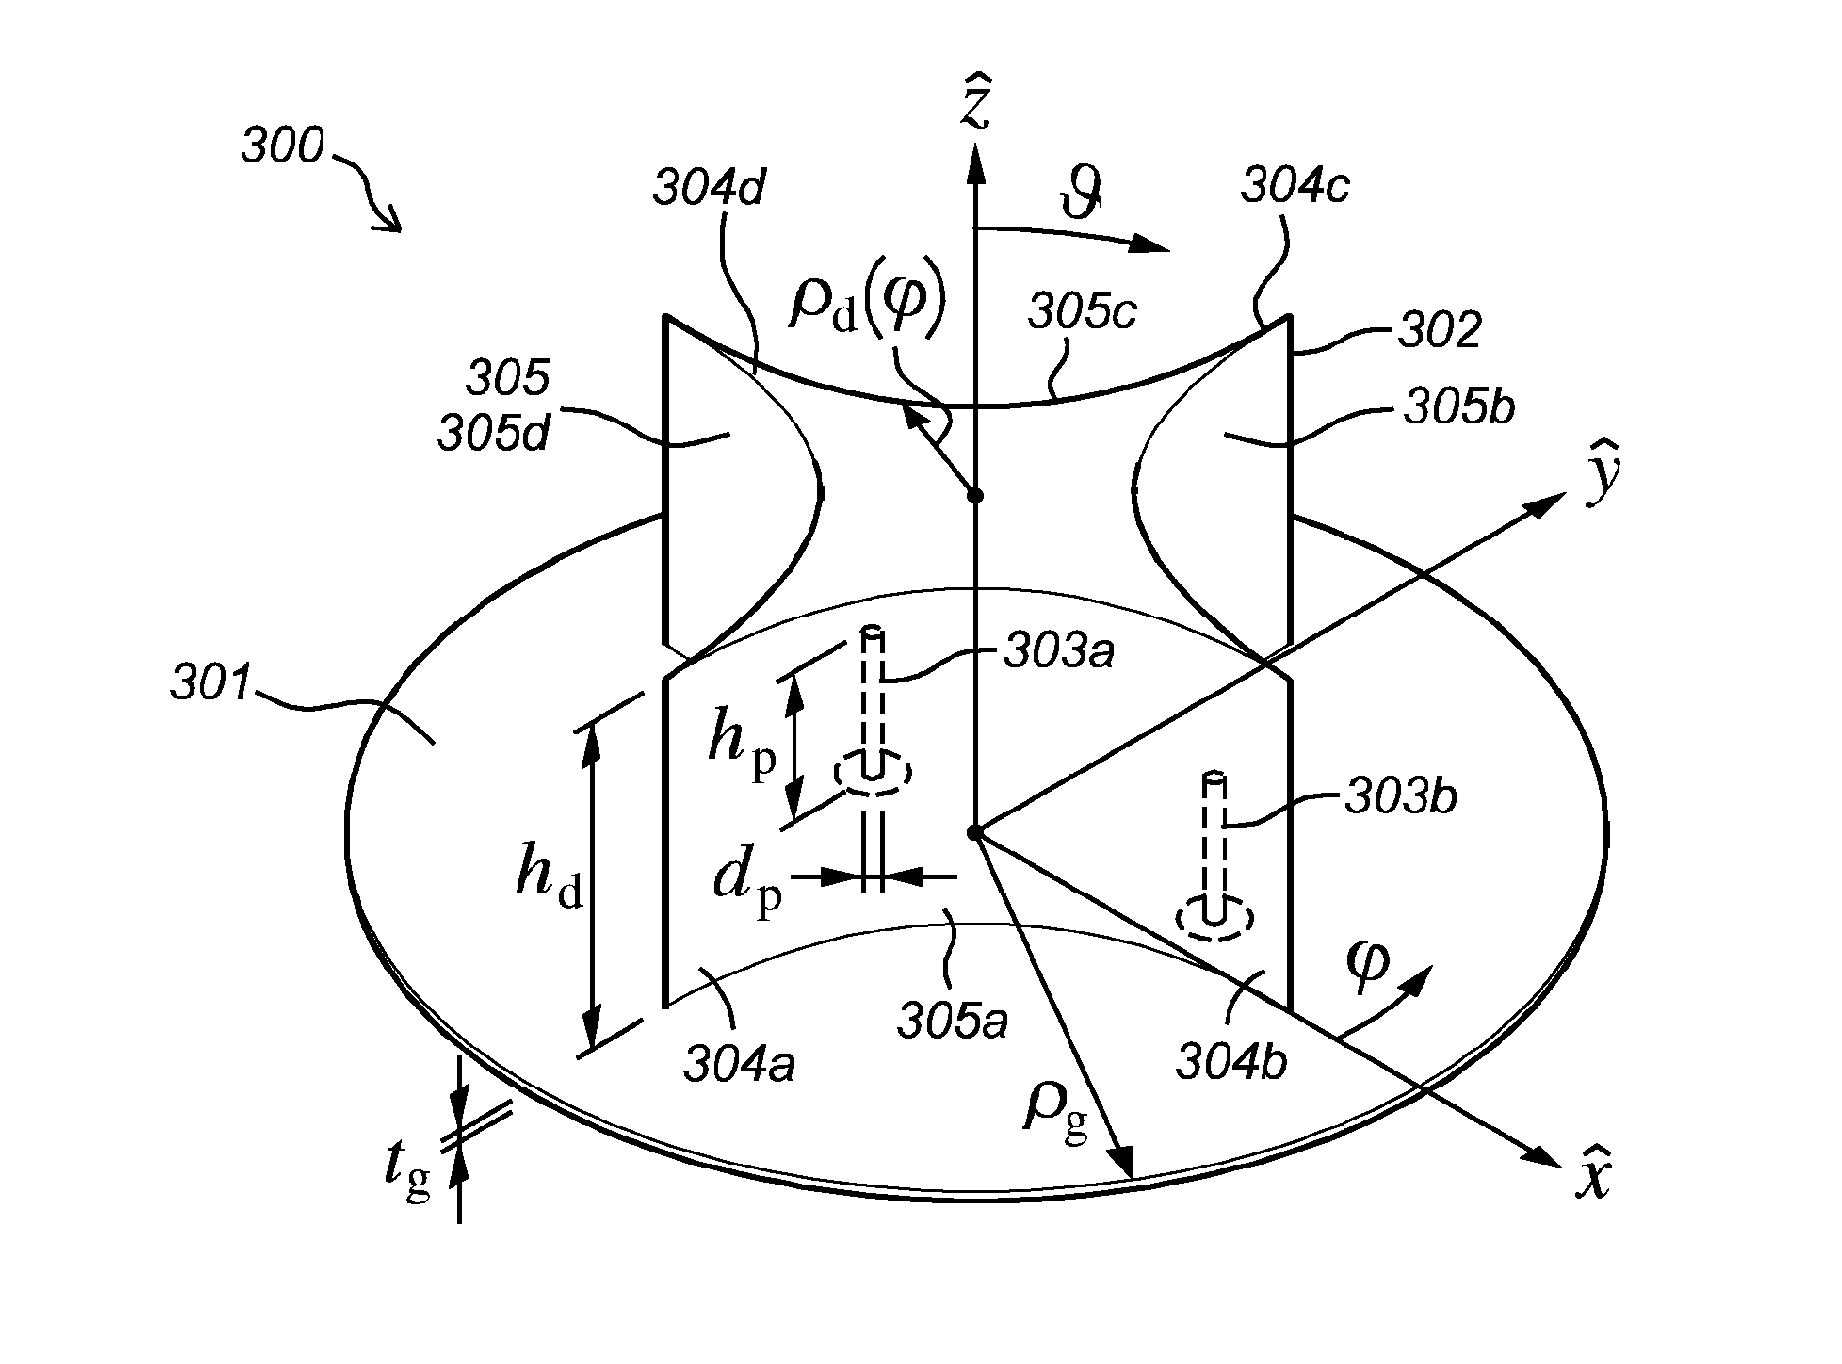 Lens Antenna, Method for Manufacturing and Using such an Antenna, and Antenna System